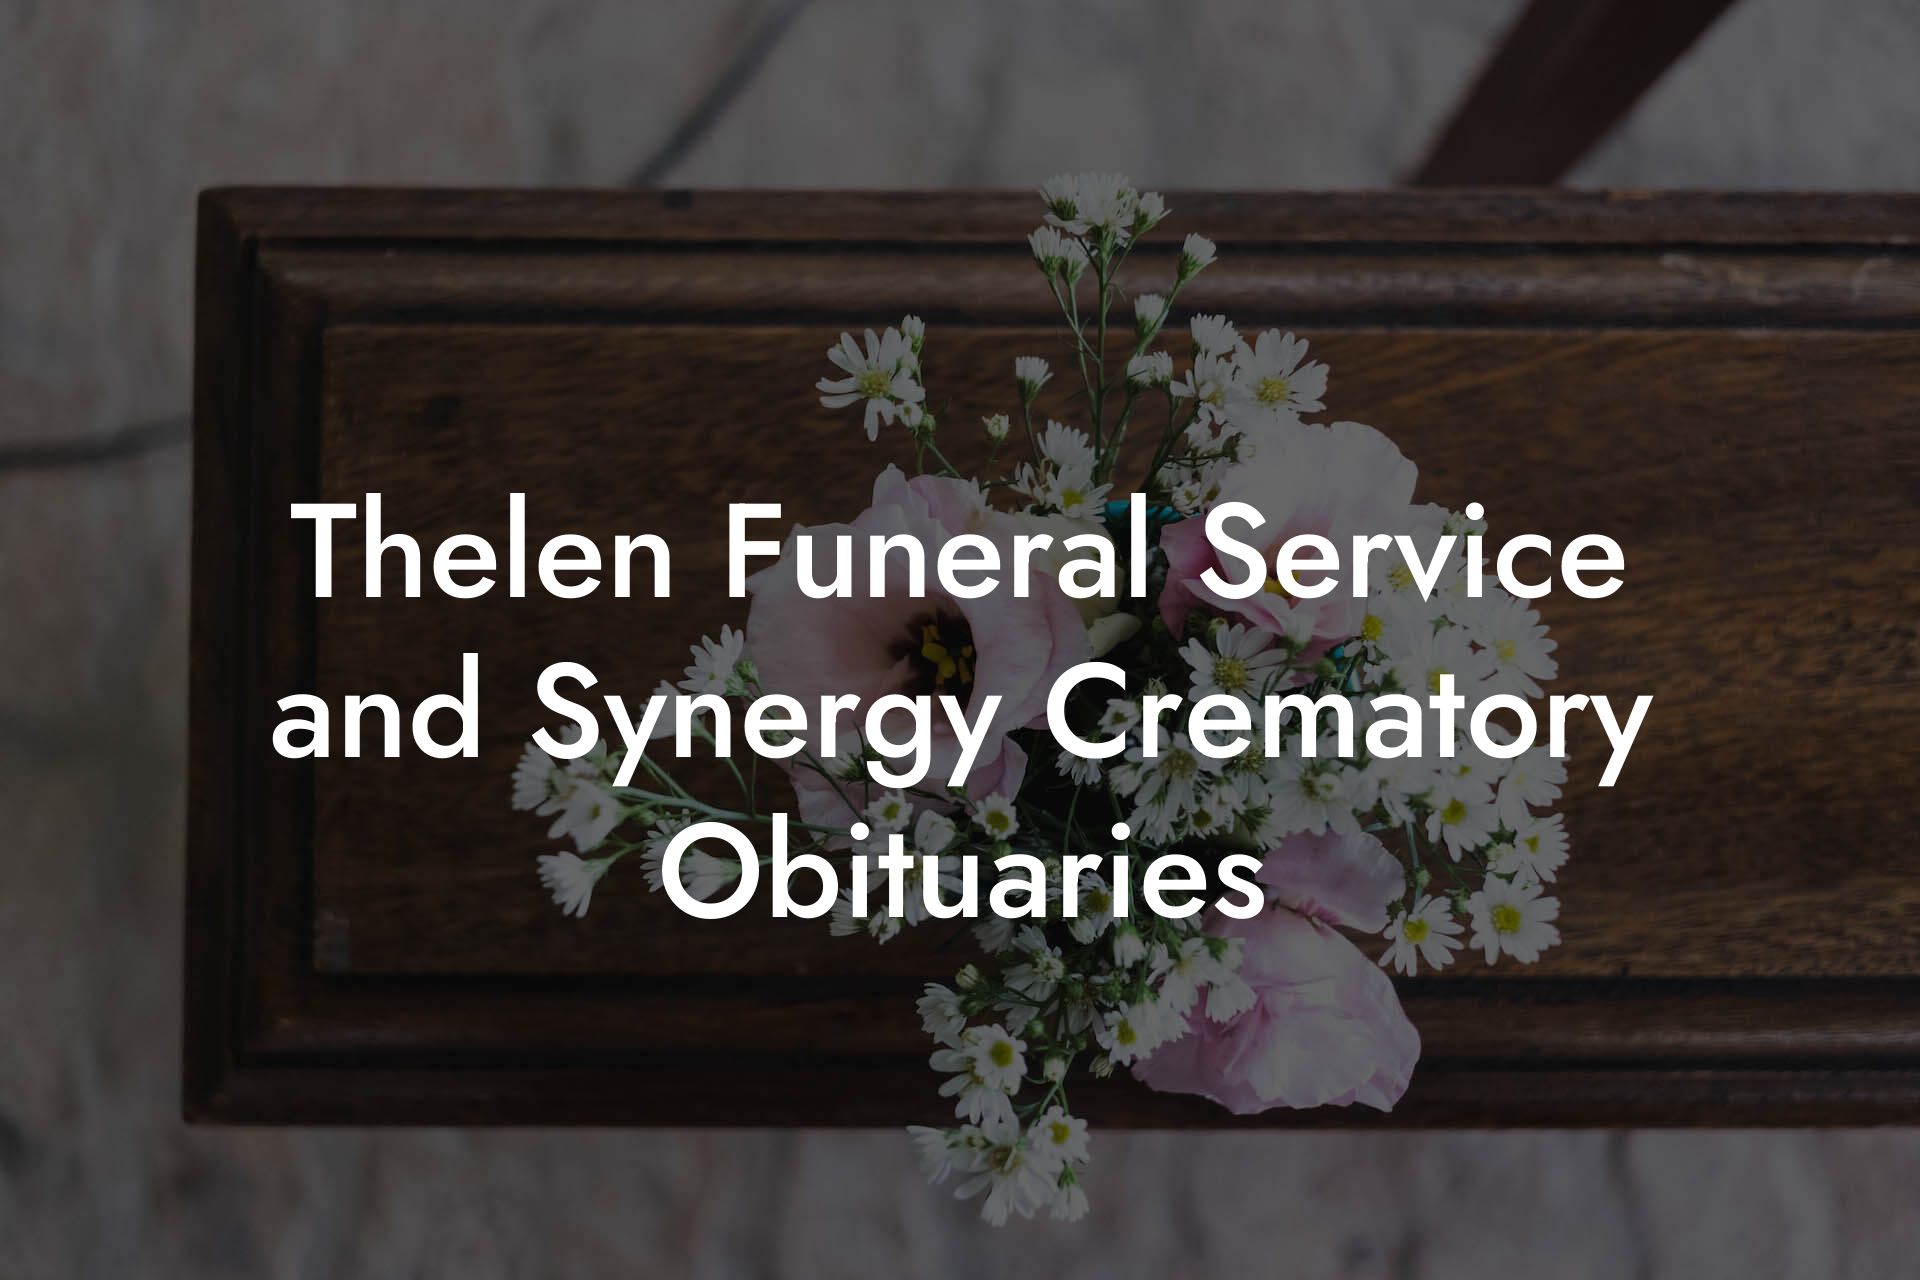 Thelen Funeral Service and Synergy Crematory Obituaries